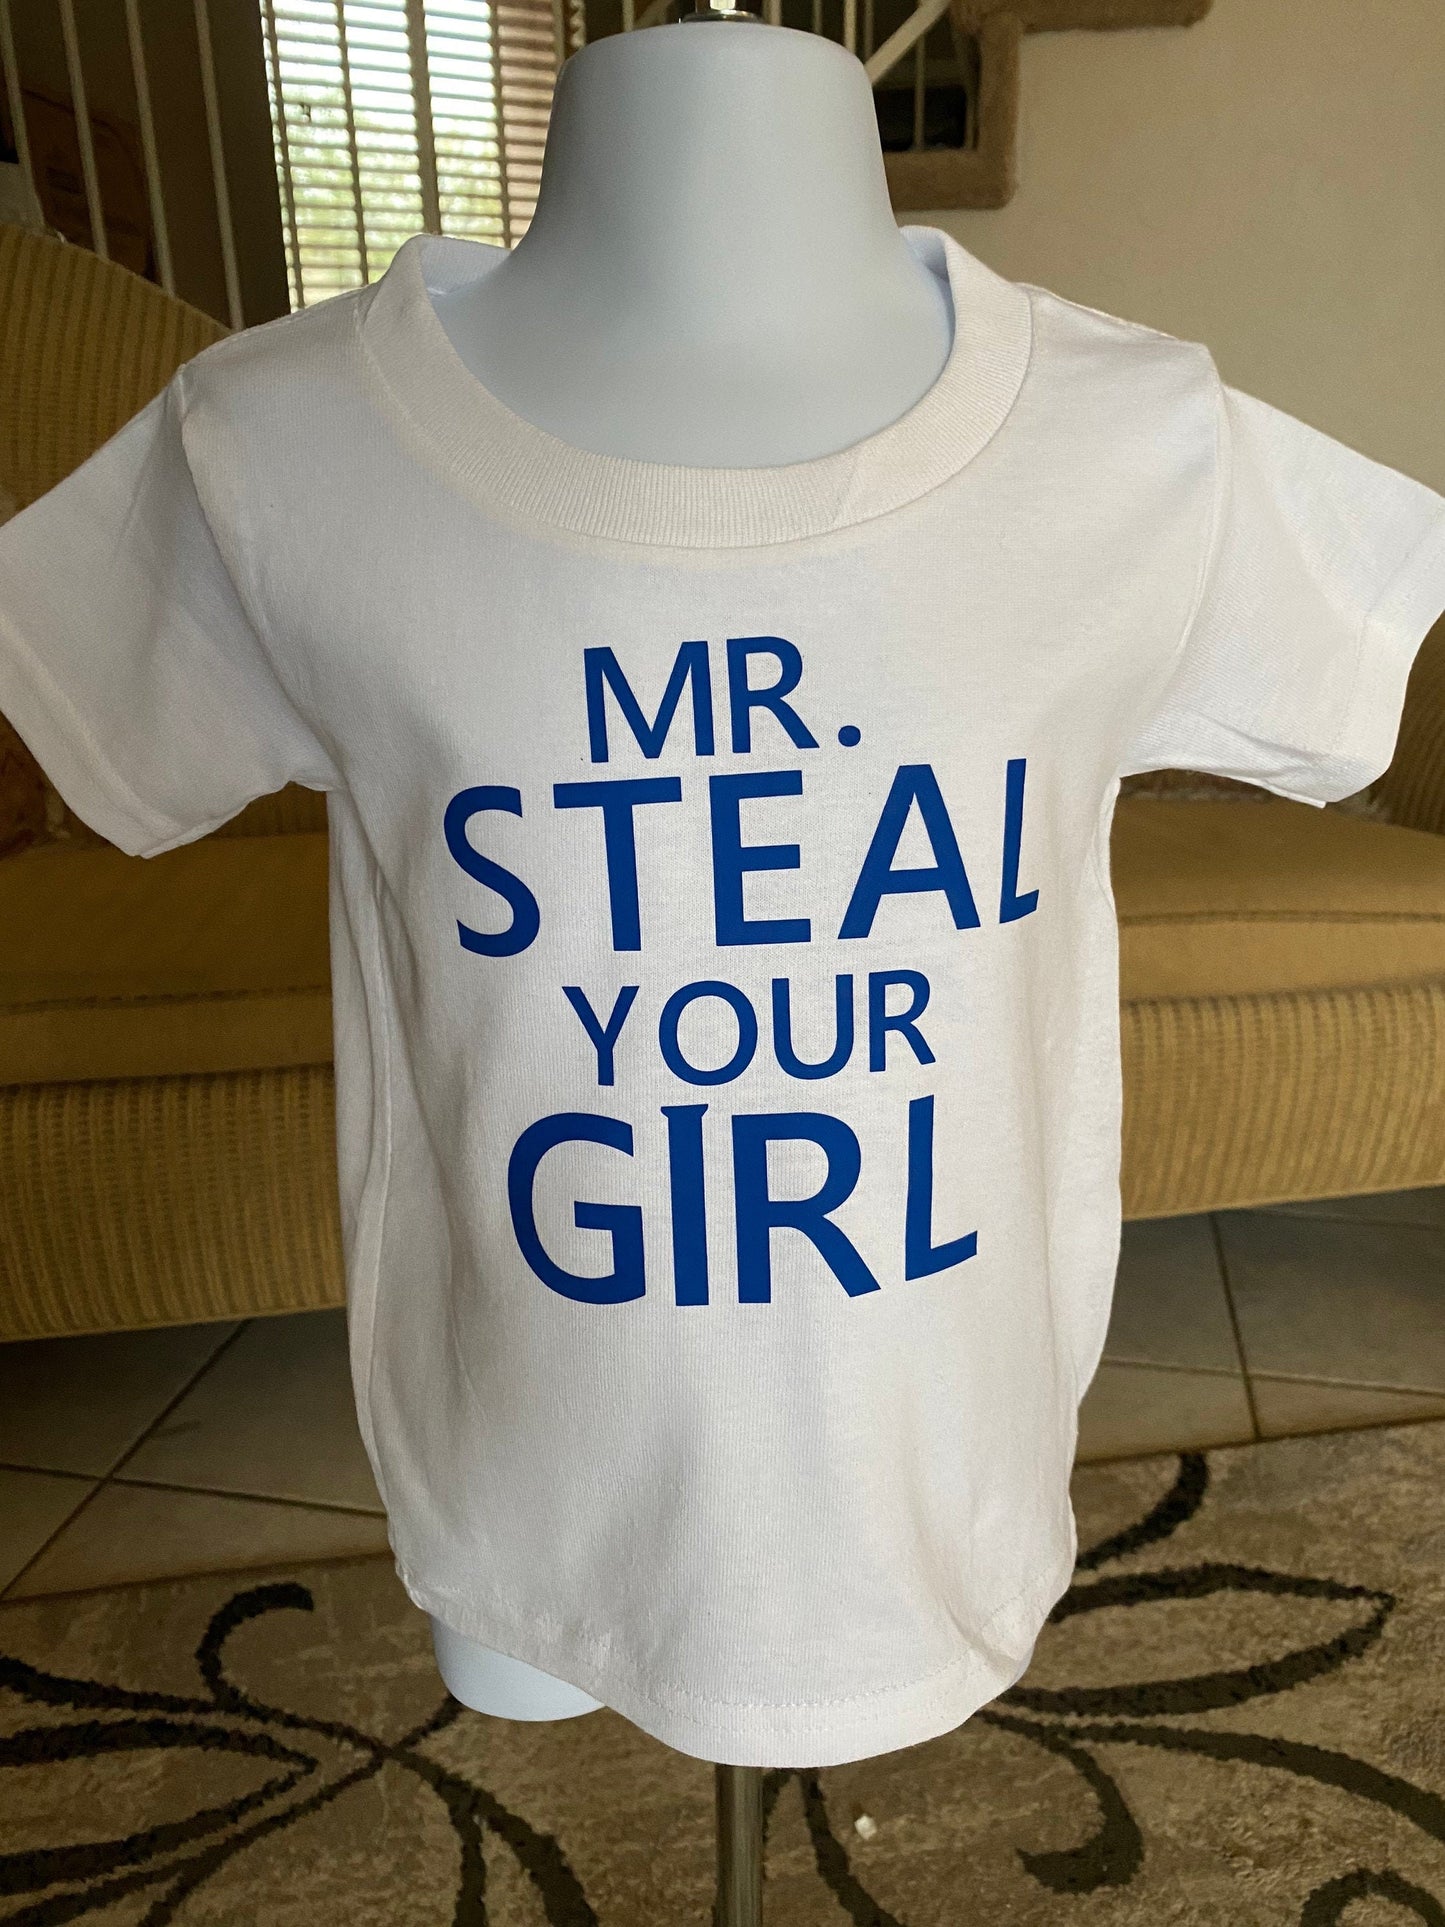 Mr. Steal Your Girl funny kids shirt toddler infant teen most popular best selling gift present birthday graphic tee